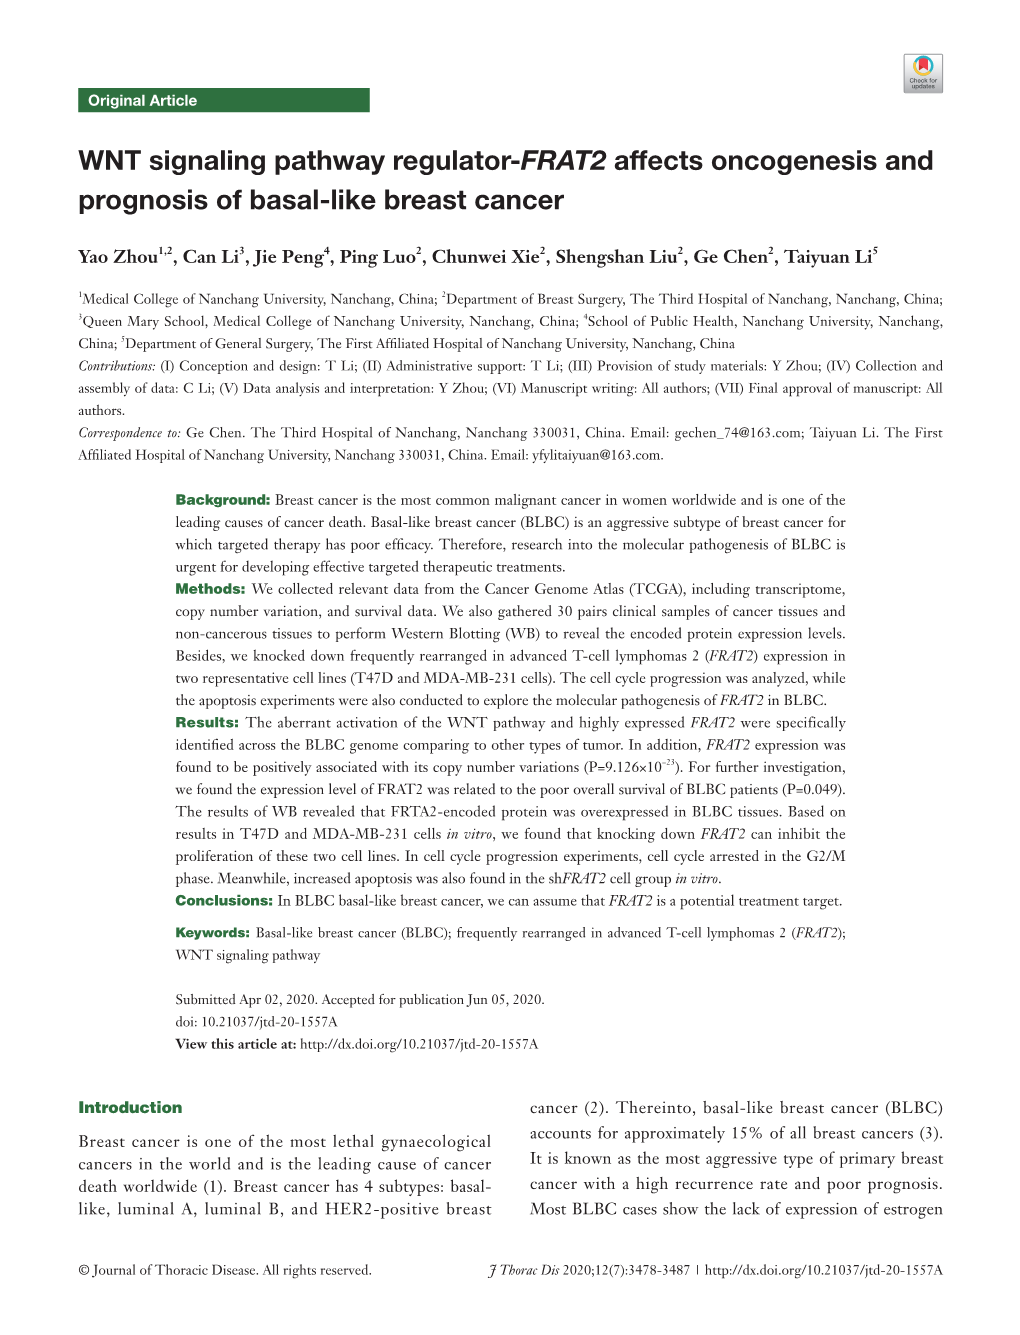 WNT Signaling Pathway Regulator-FRAT2 Affects Oncogenesis and Prognosis of Basal-Like Breast Cancer